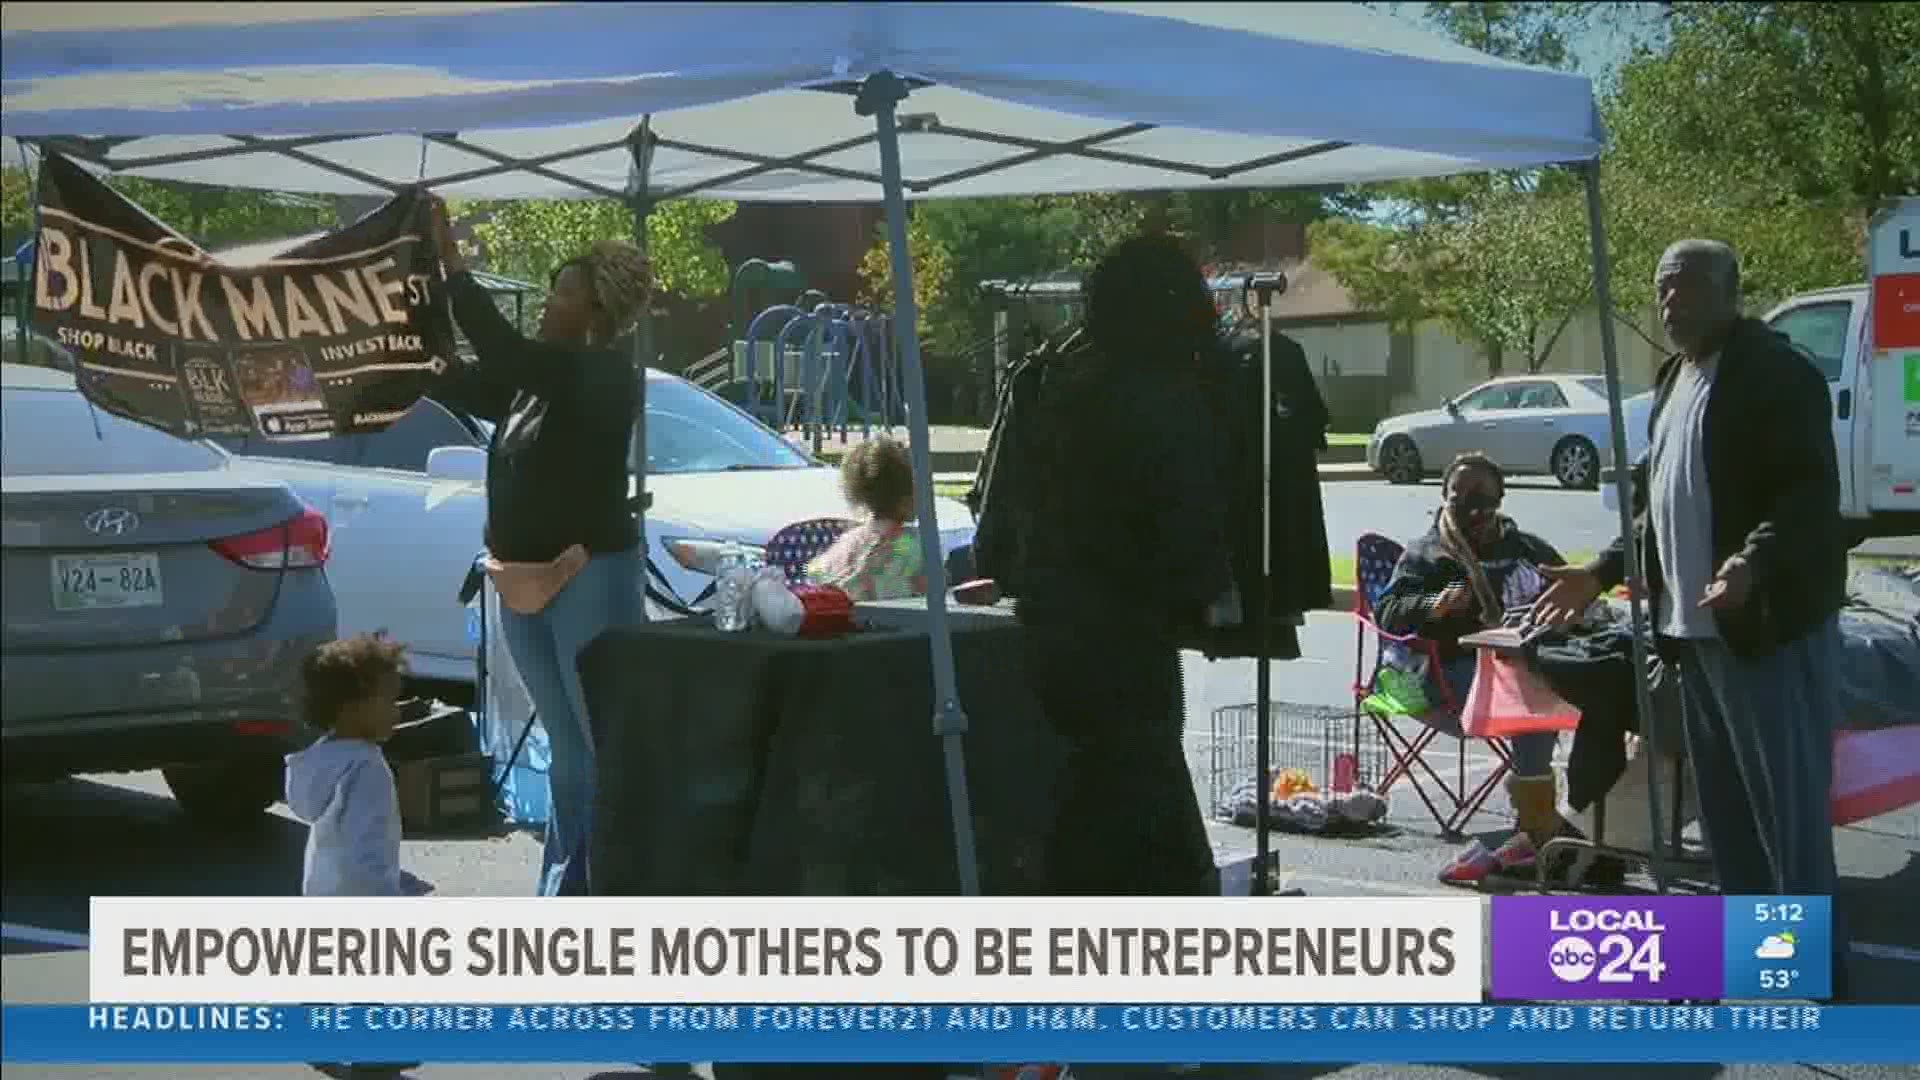 JUICE Orange Mound is looking for single mothers to participate in a pilot program for resources, education, and micro-loans for entrepreneurship.